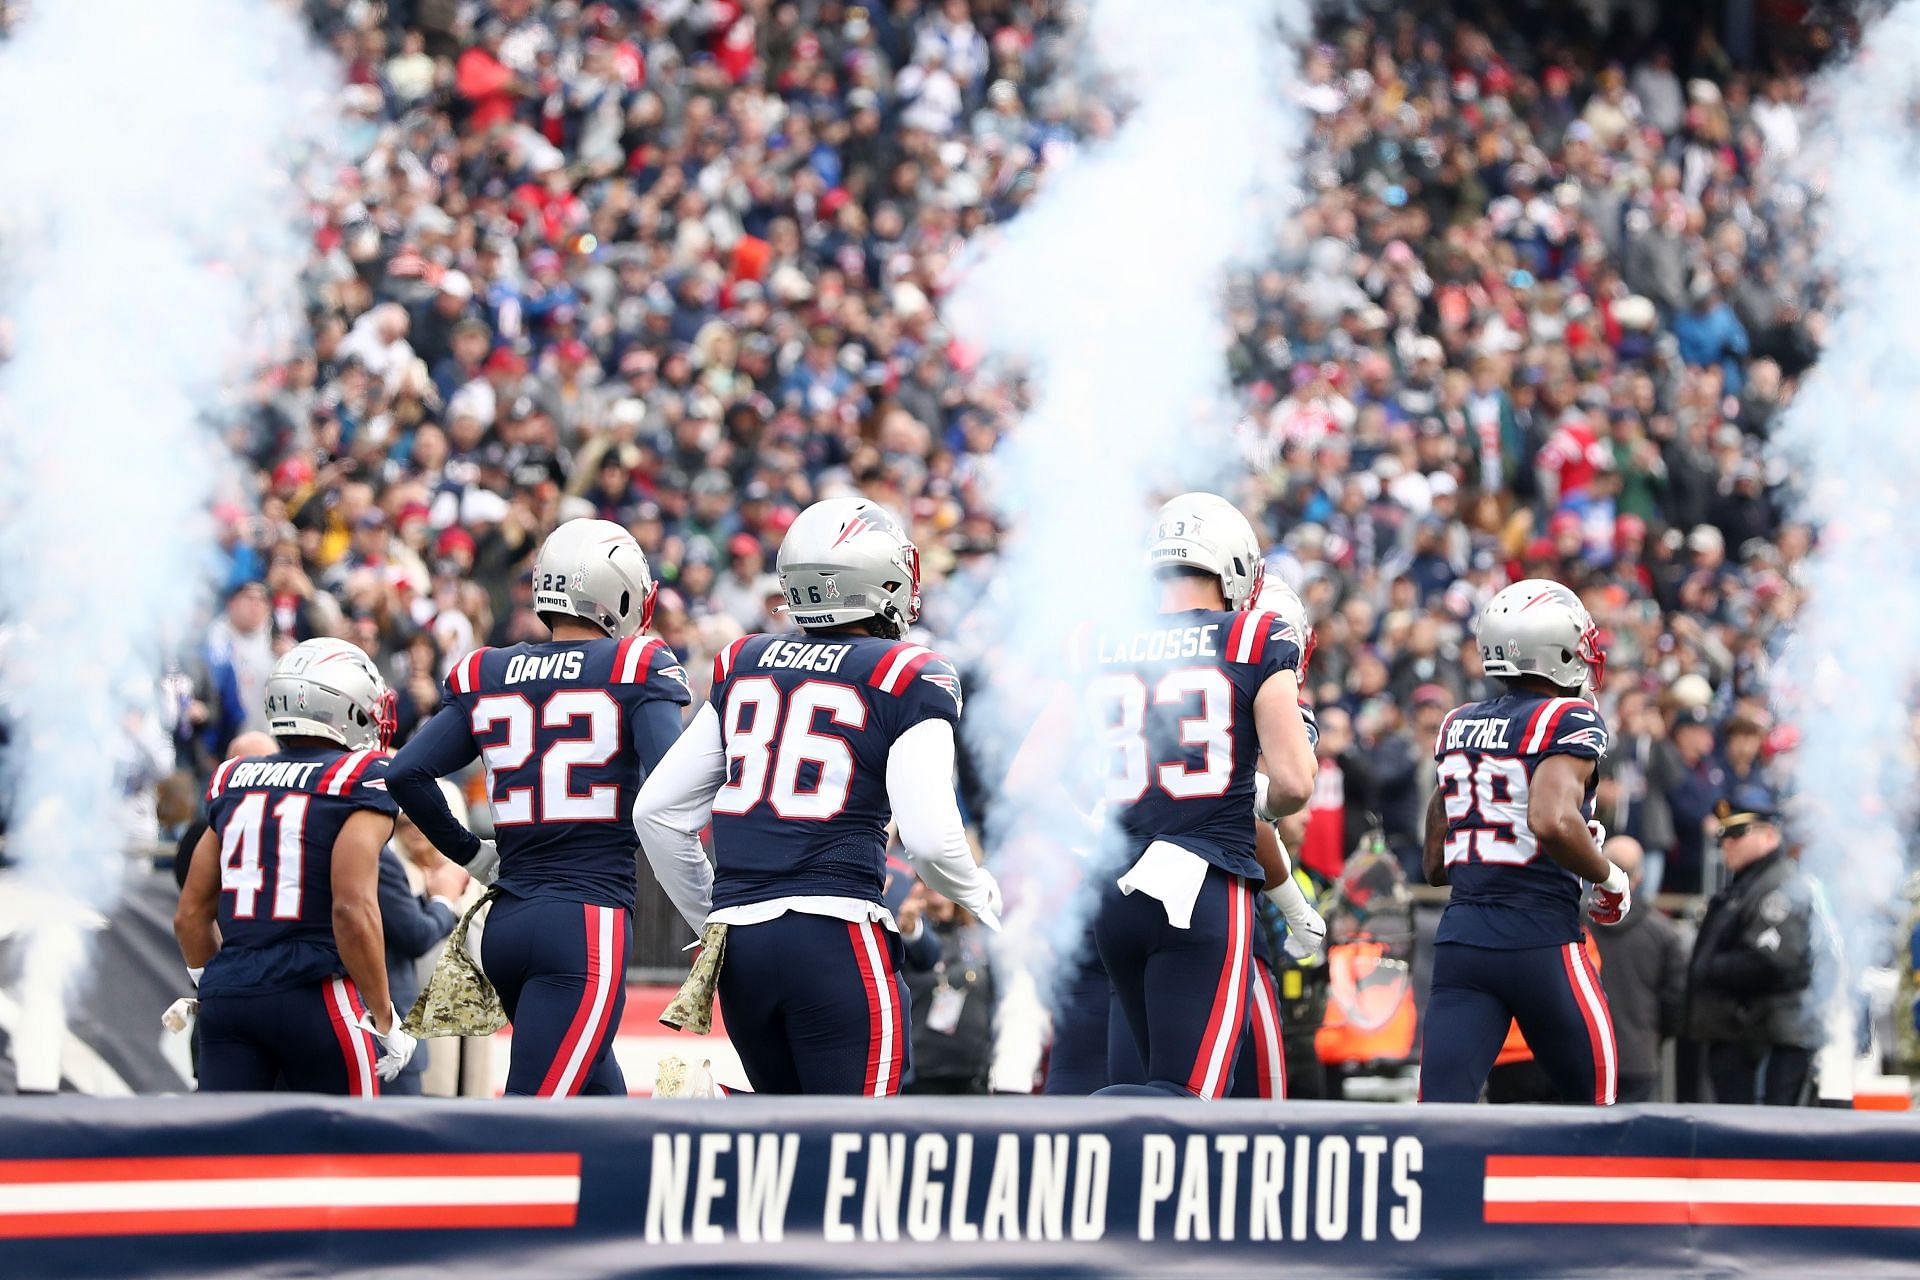 The New England Patriots coming out for their game against the Cleveland Browns in Week 10